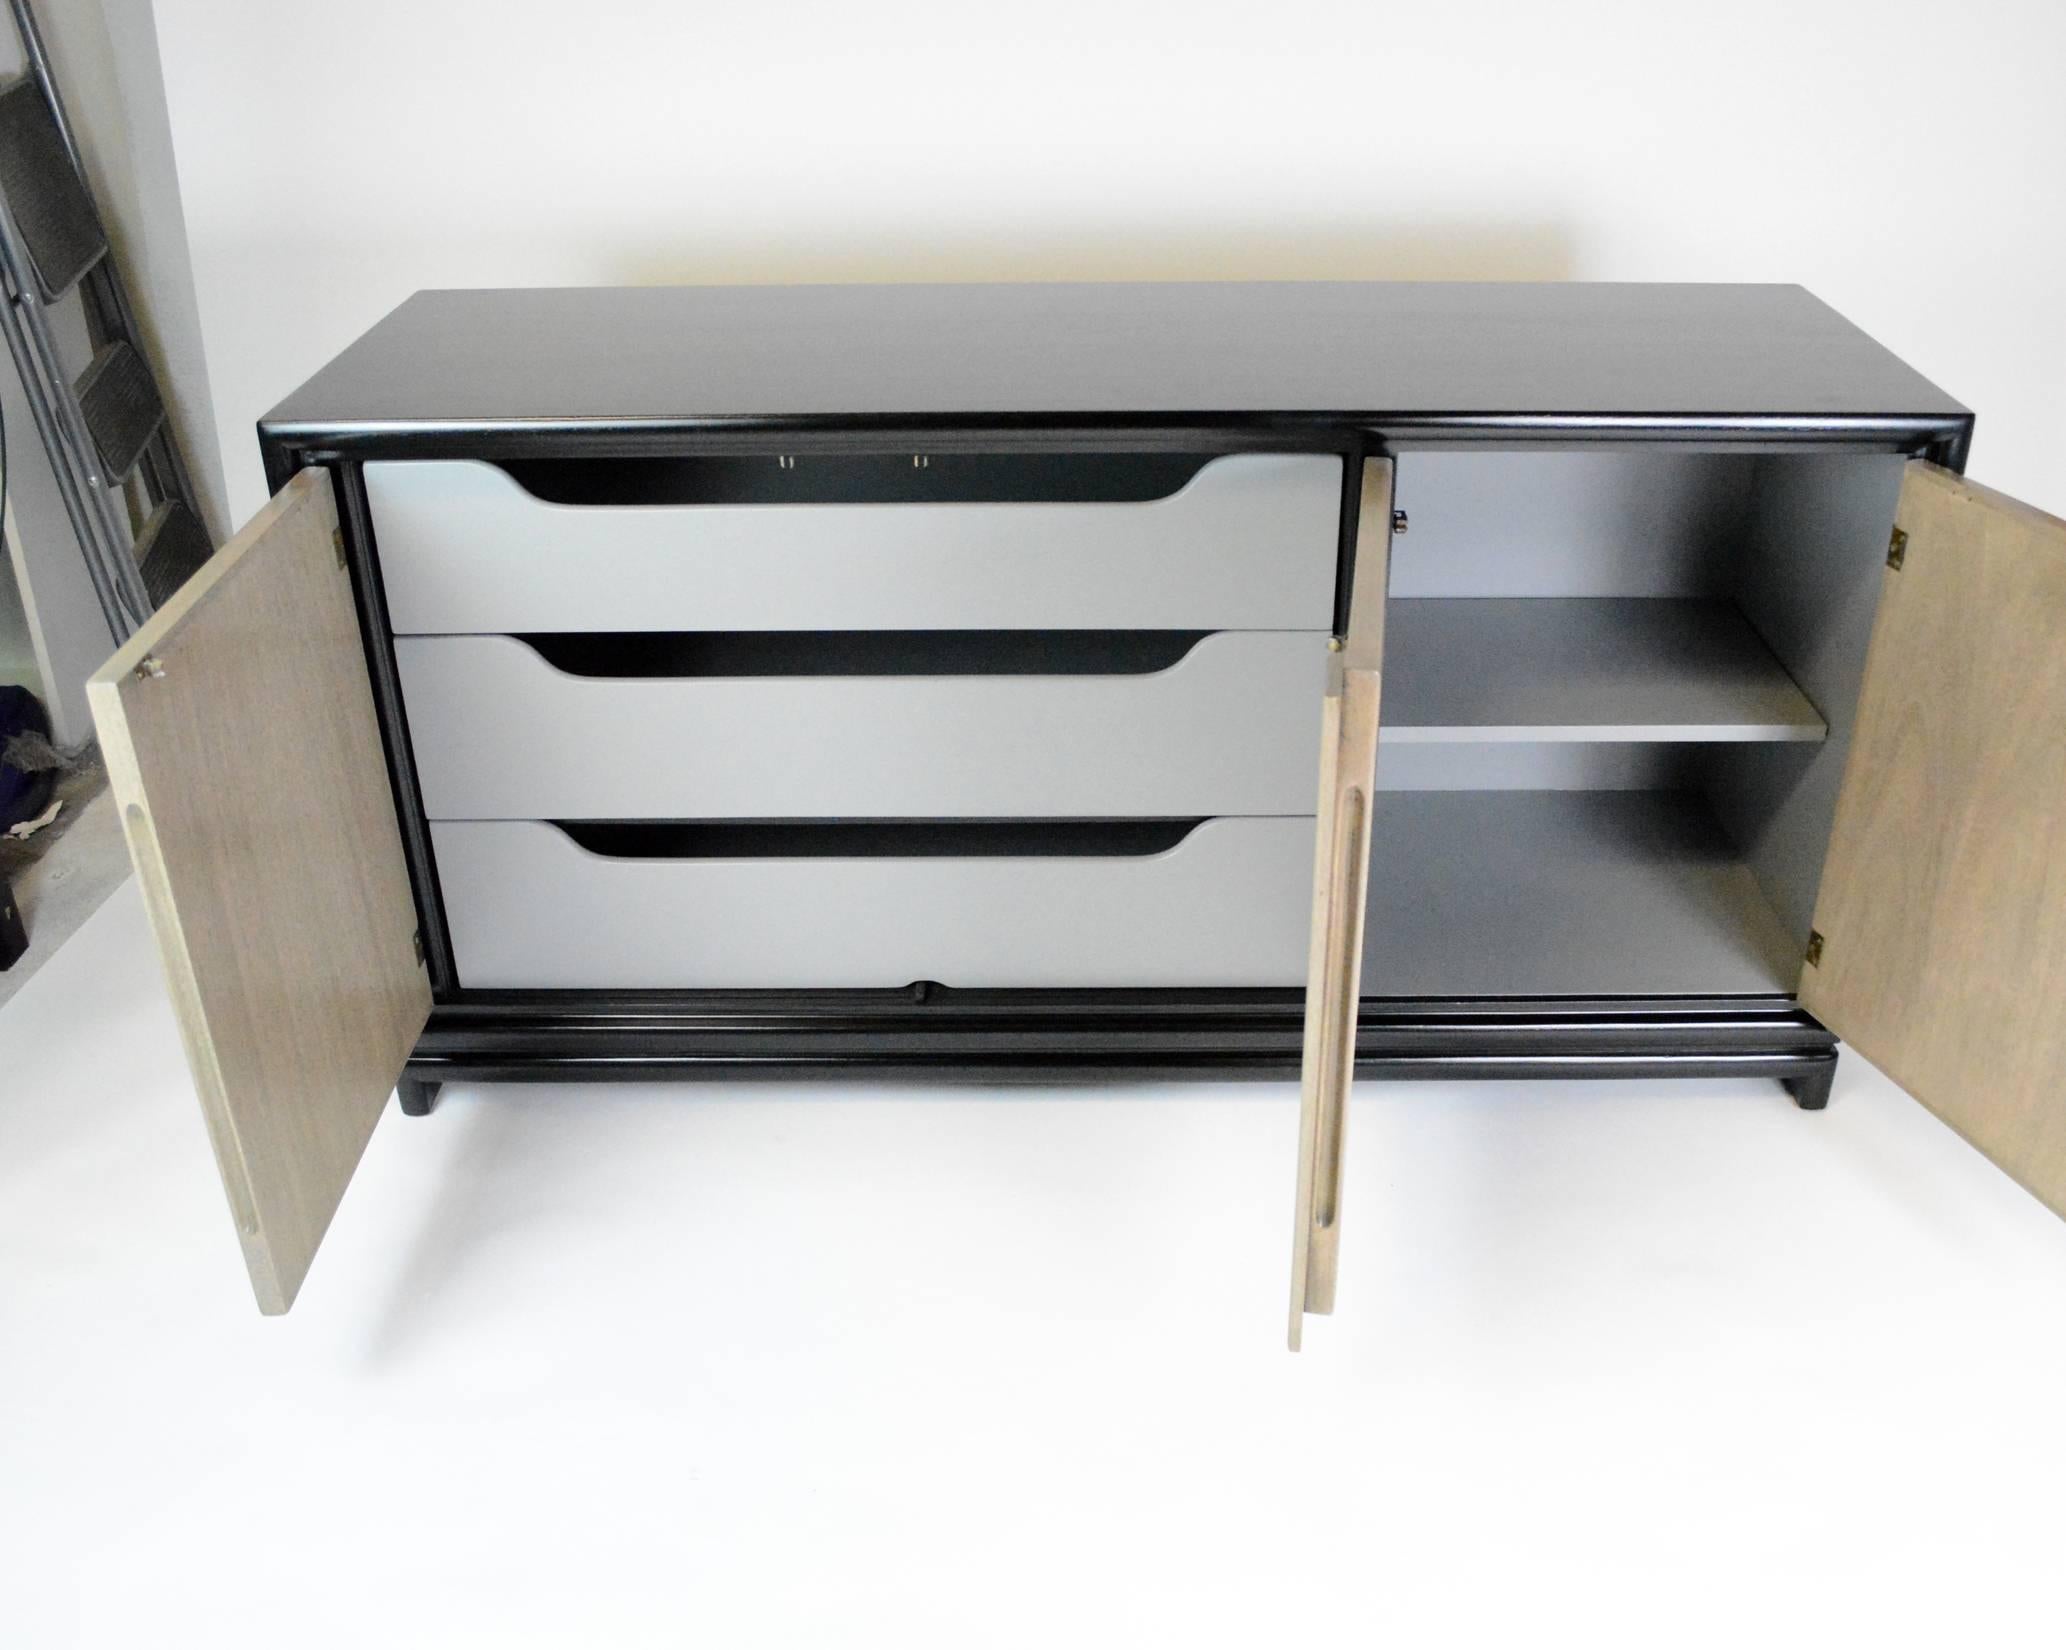 A black lacquered Mid-Century Modern three-door credenza buffet, opening to reveal drawers on left side and a shelf behind the right door. doors in a bleached grey washed mahogany veneer. Newly refinished.